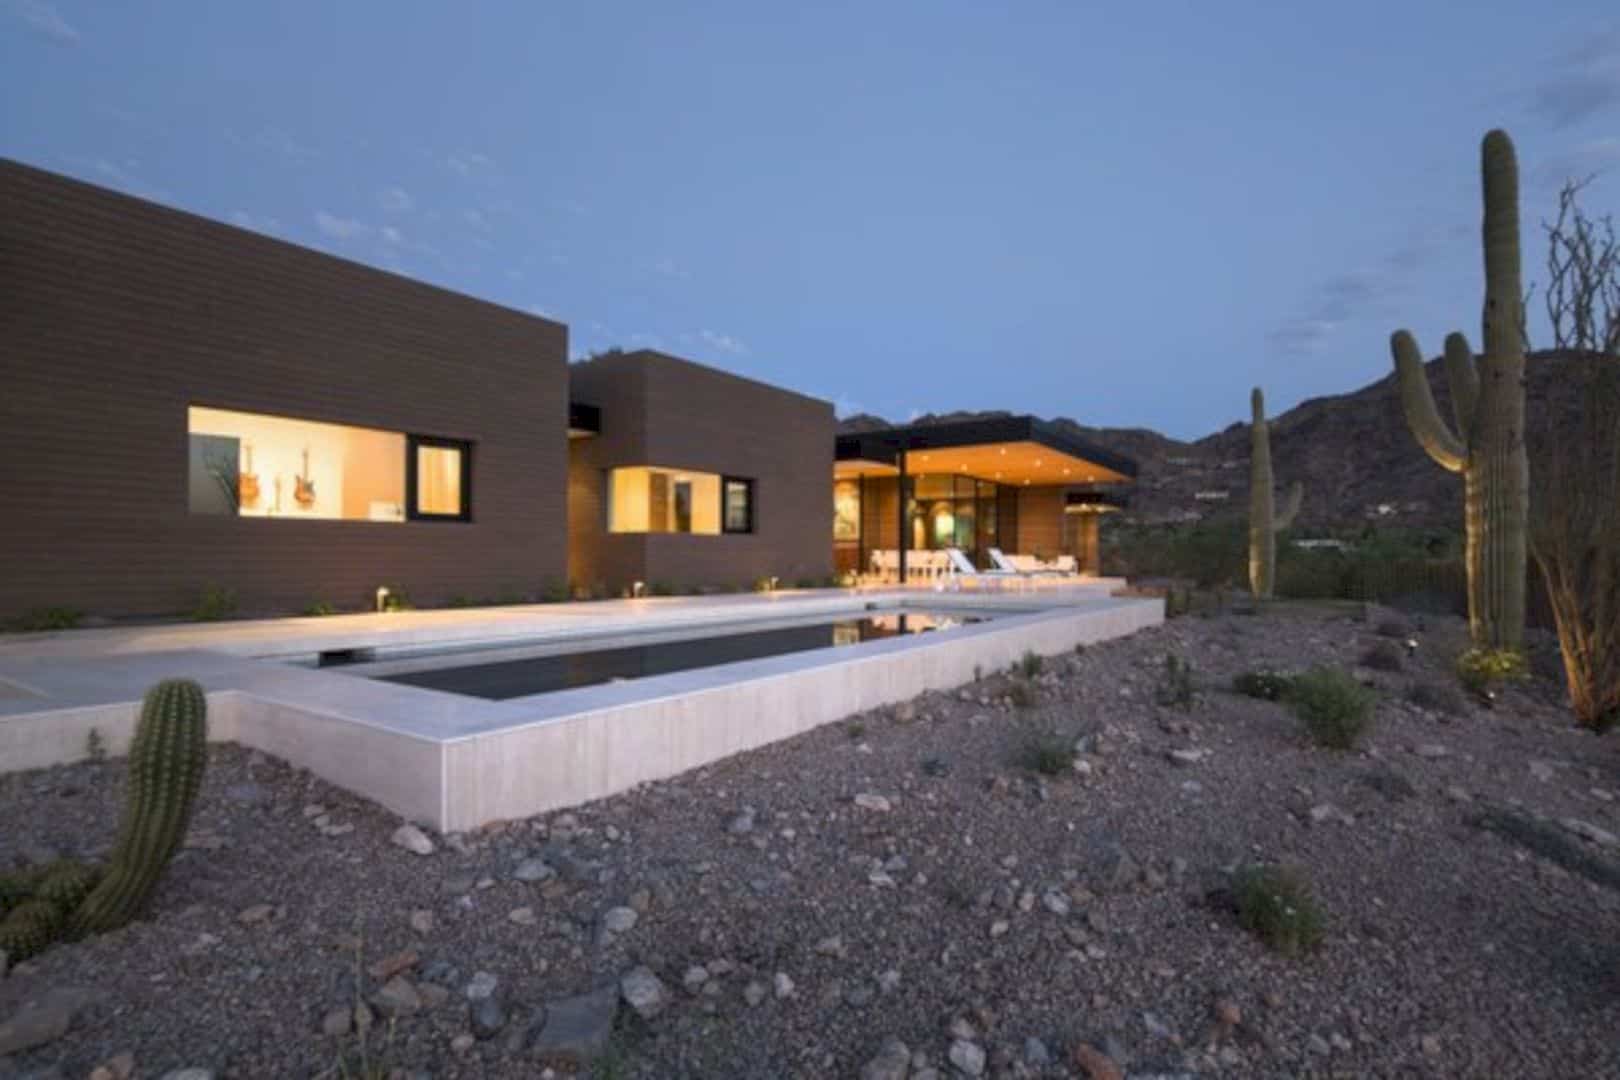 The Rammed Earth Modern Residence A Modest Yet Sophisticated Residence Dominated By Humble Materials 2